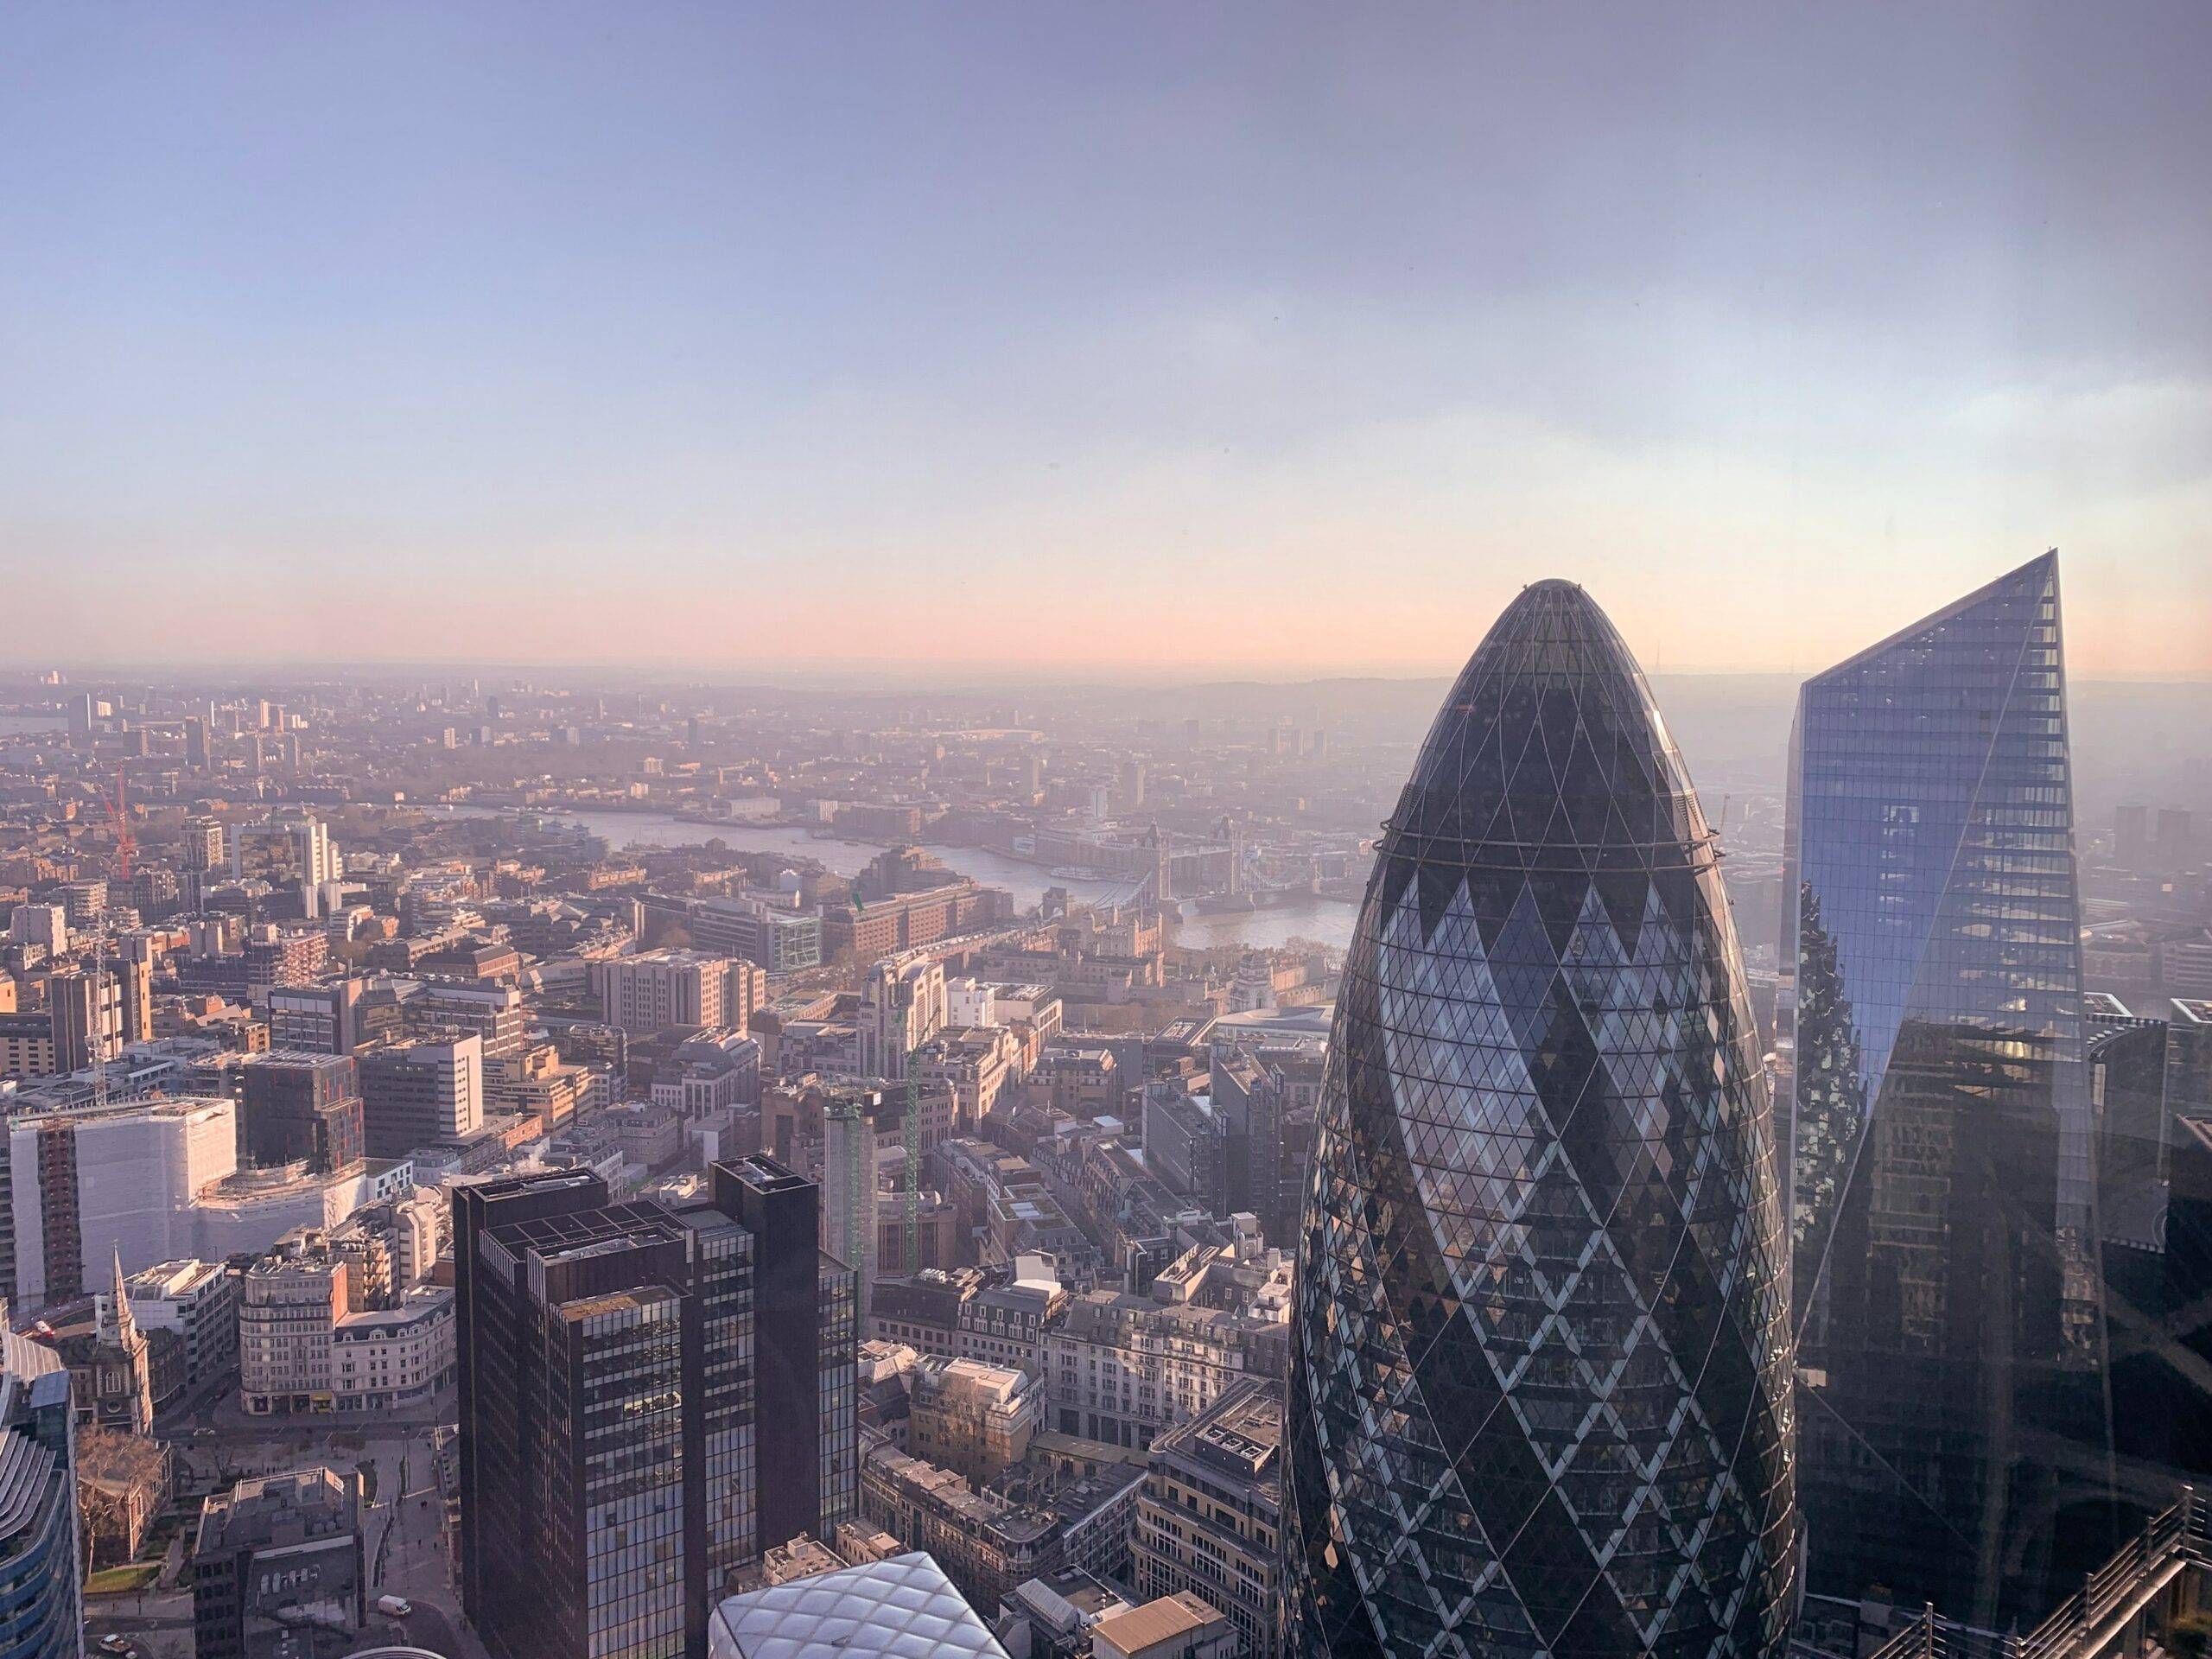 London's continued appeal for high-growth business